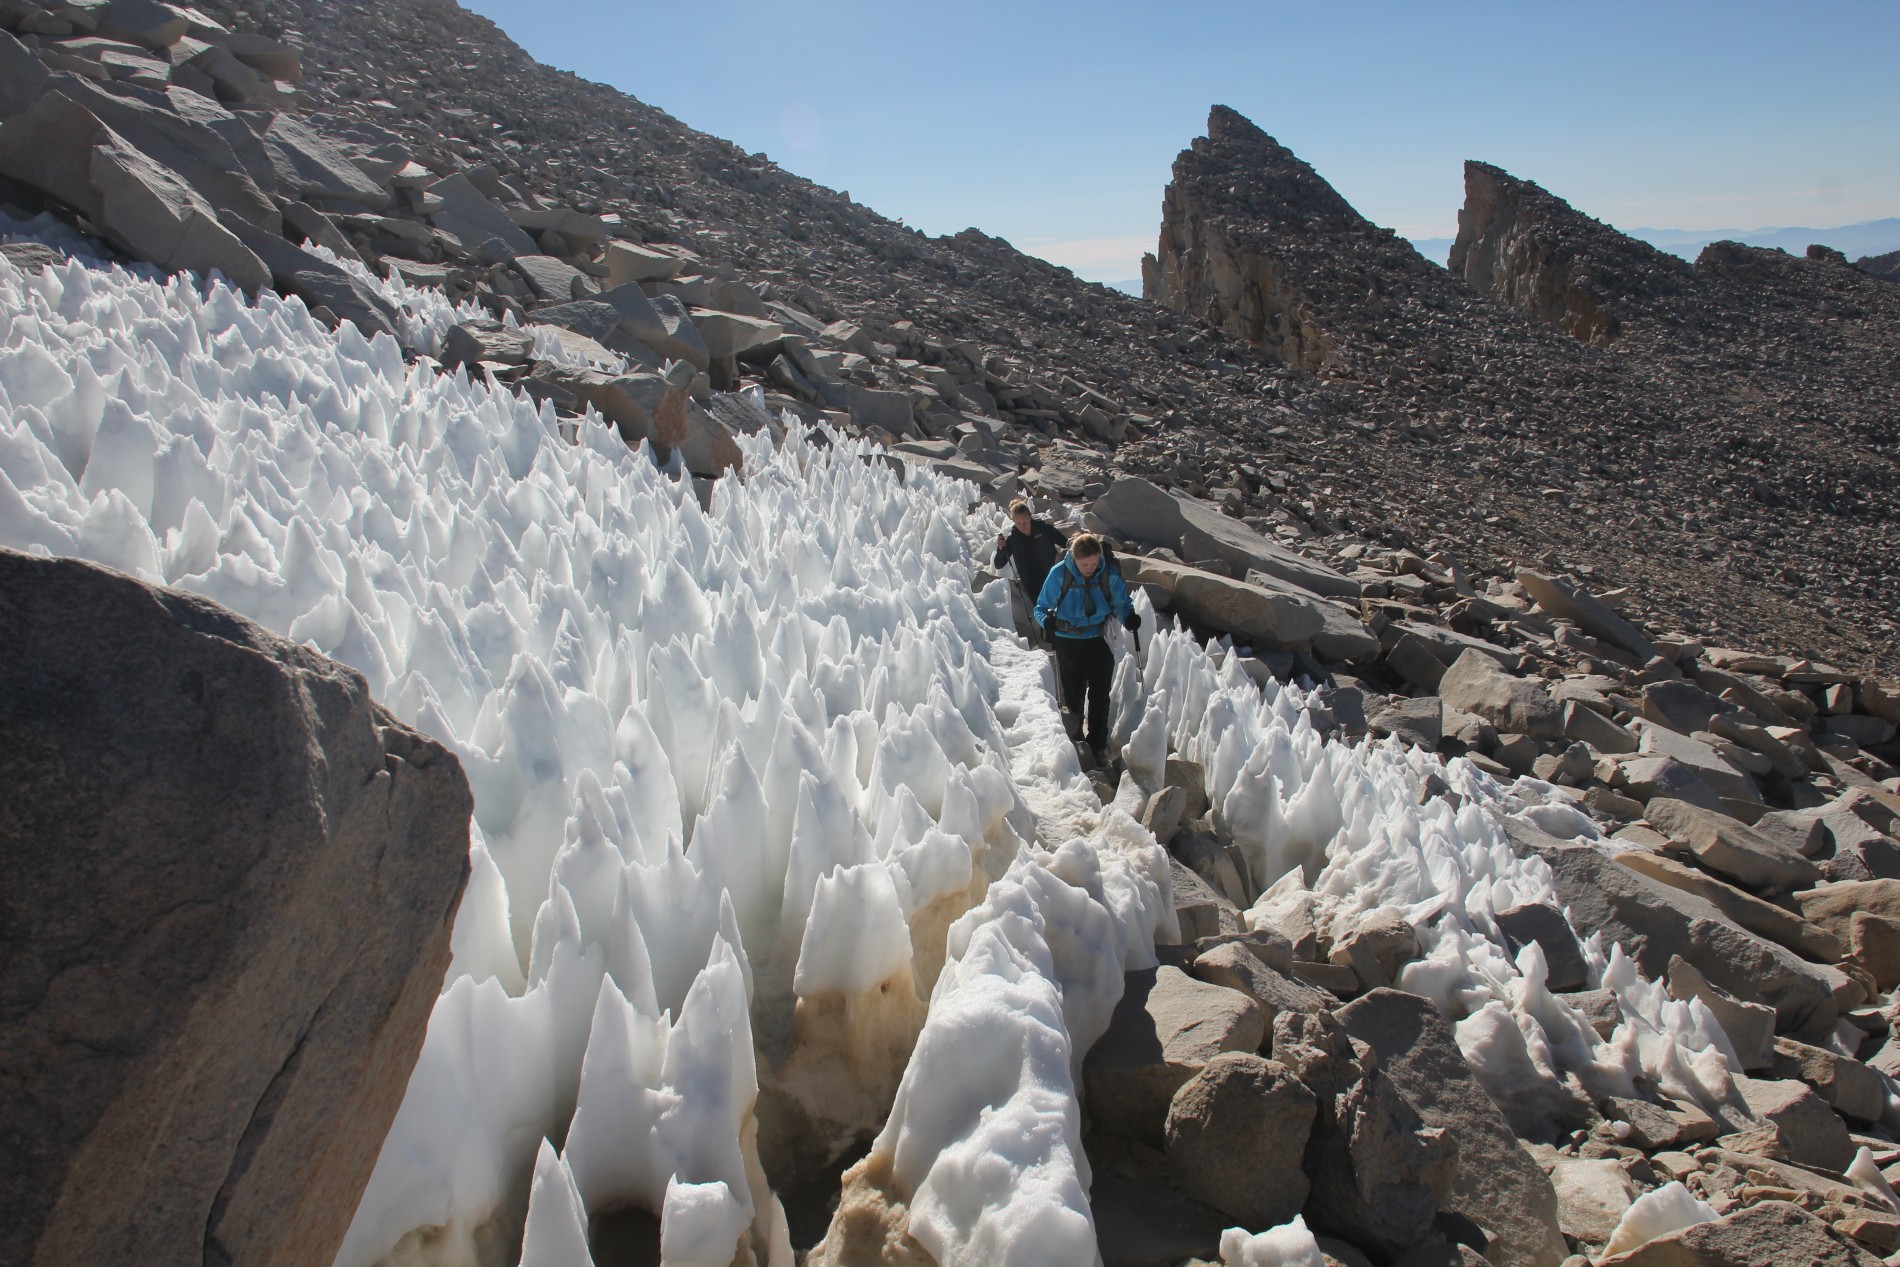 Hikers make their way through a field of snow towers.